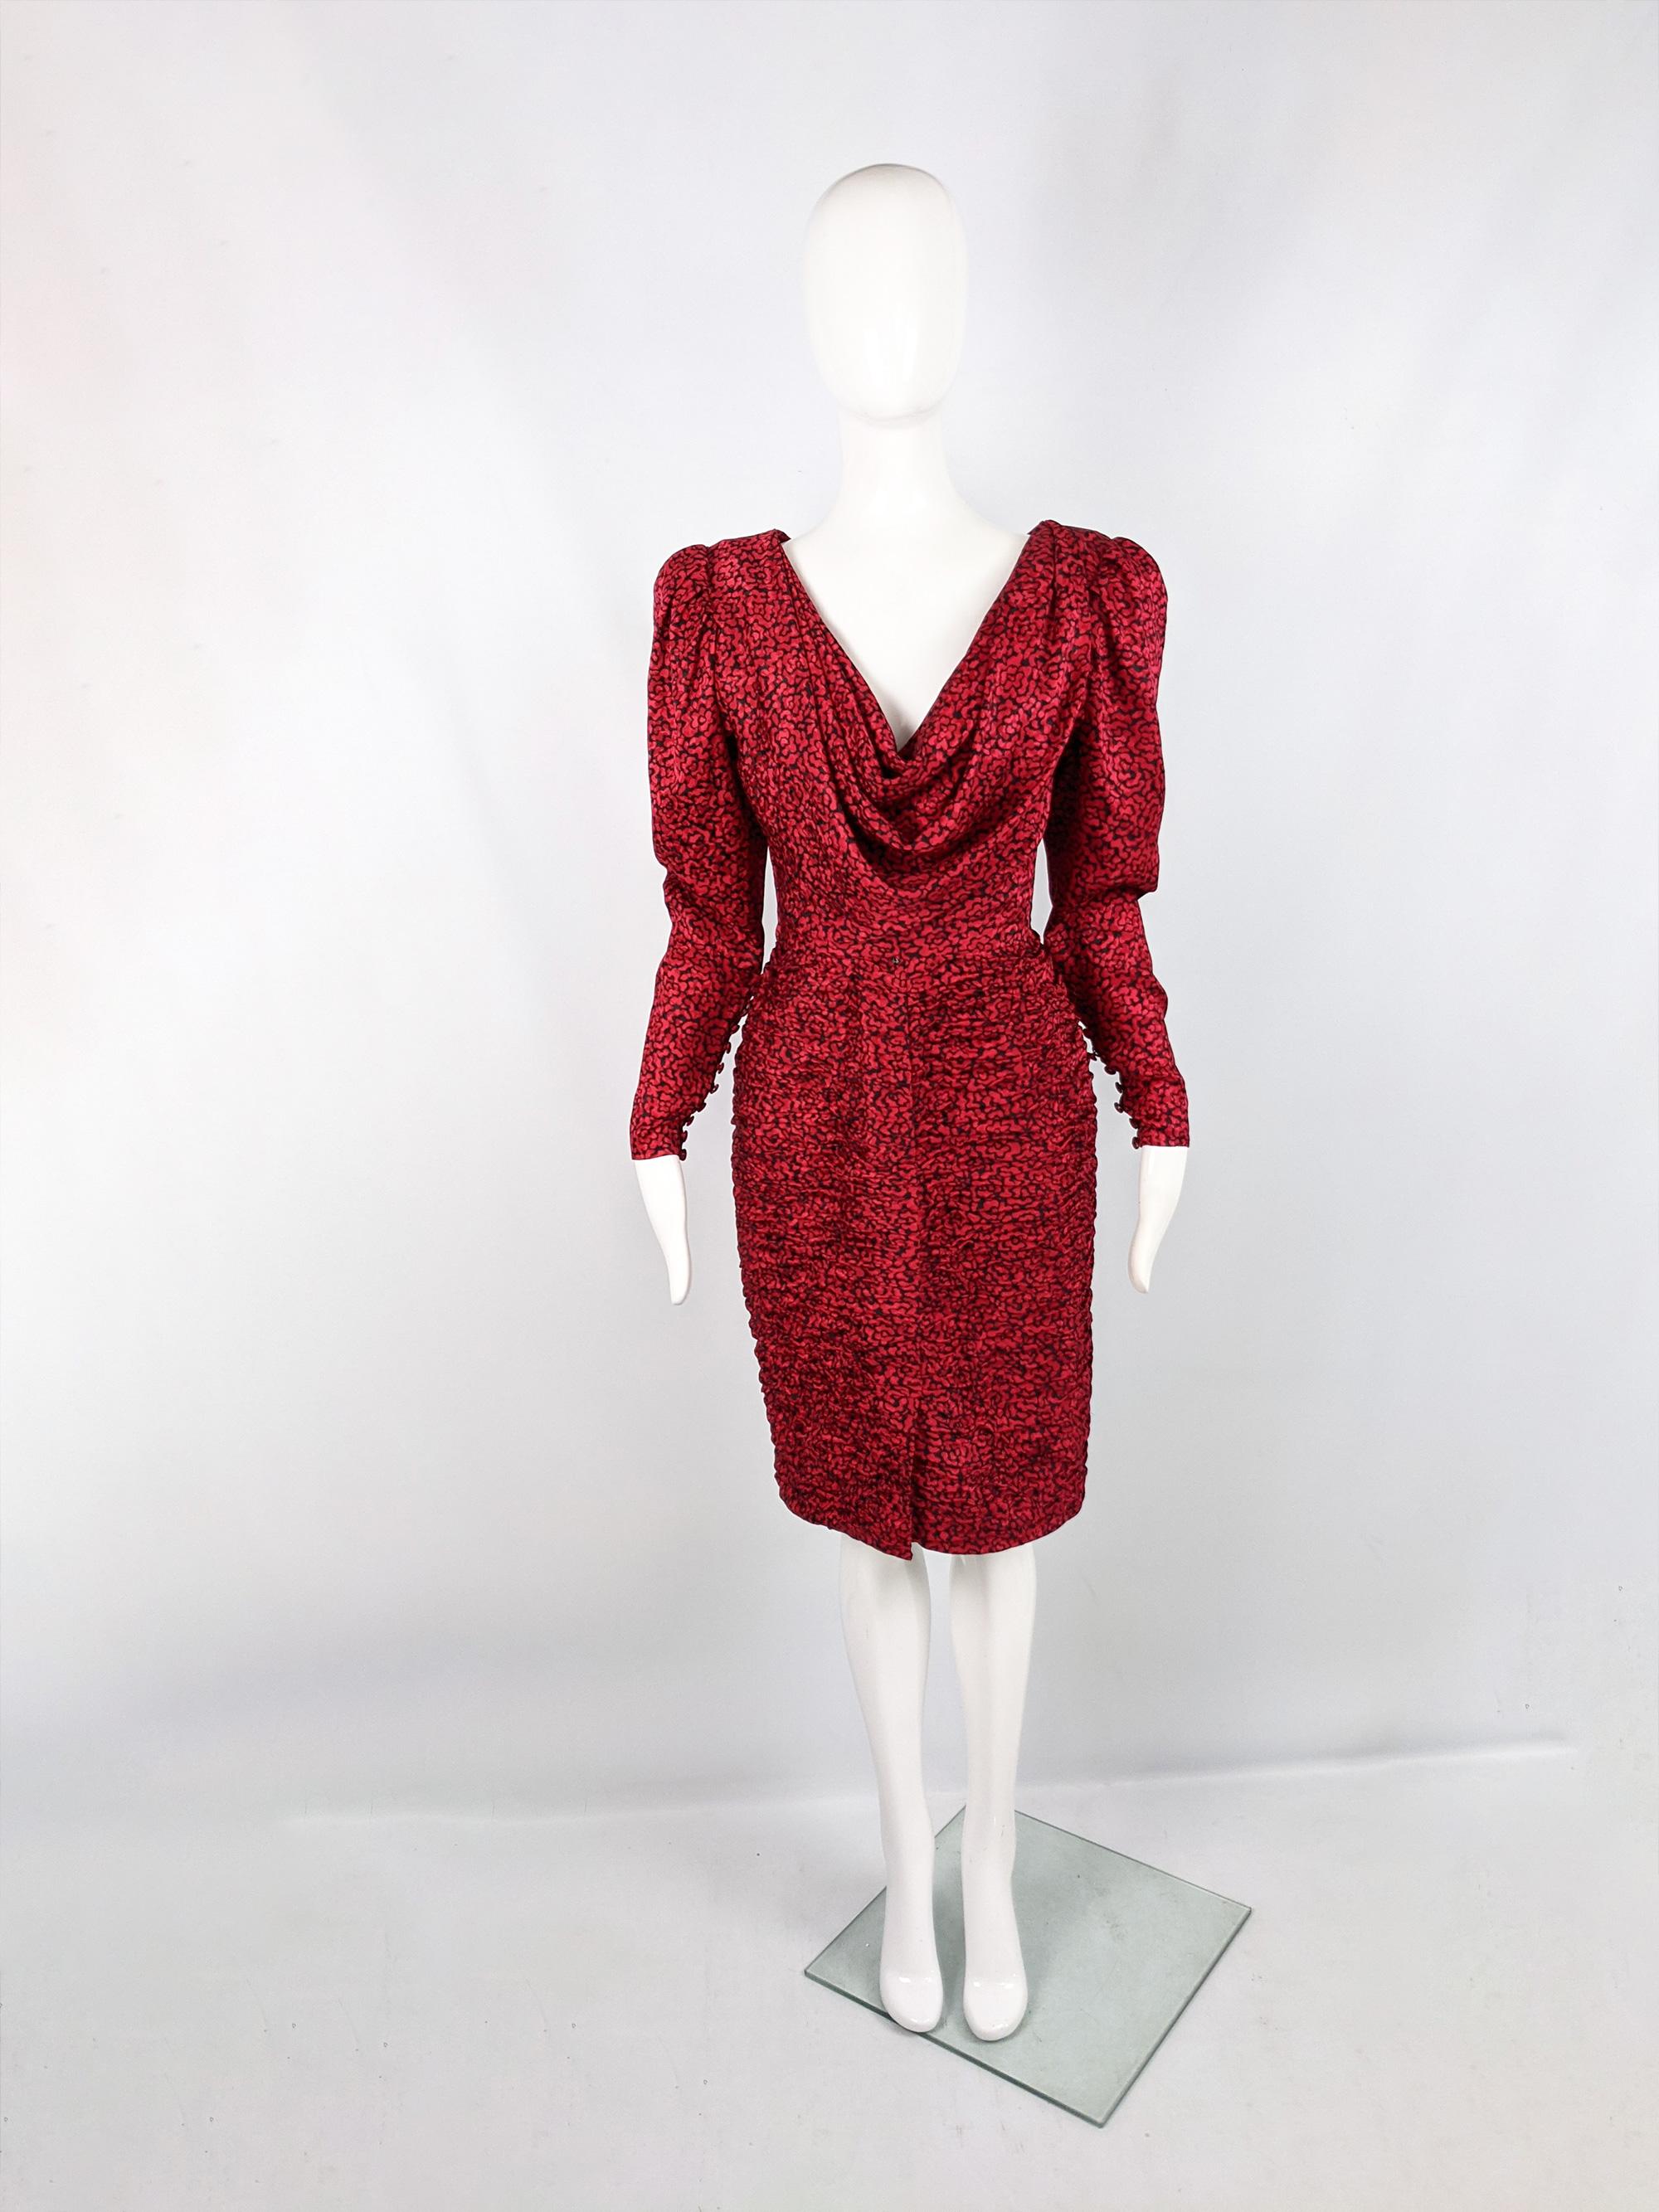 A stunning vintage womens party dress from the 80s by luxury French fashion designer, Emanuel Ungaro. In a red and black silk with a ruched skirt, deep, draped cowl neck and shoulder pads that puff out the sleeves to create a leg o mutton shape that